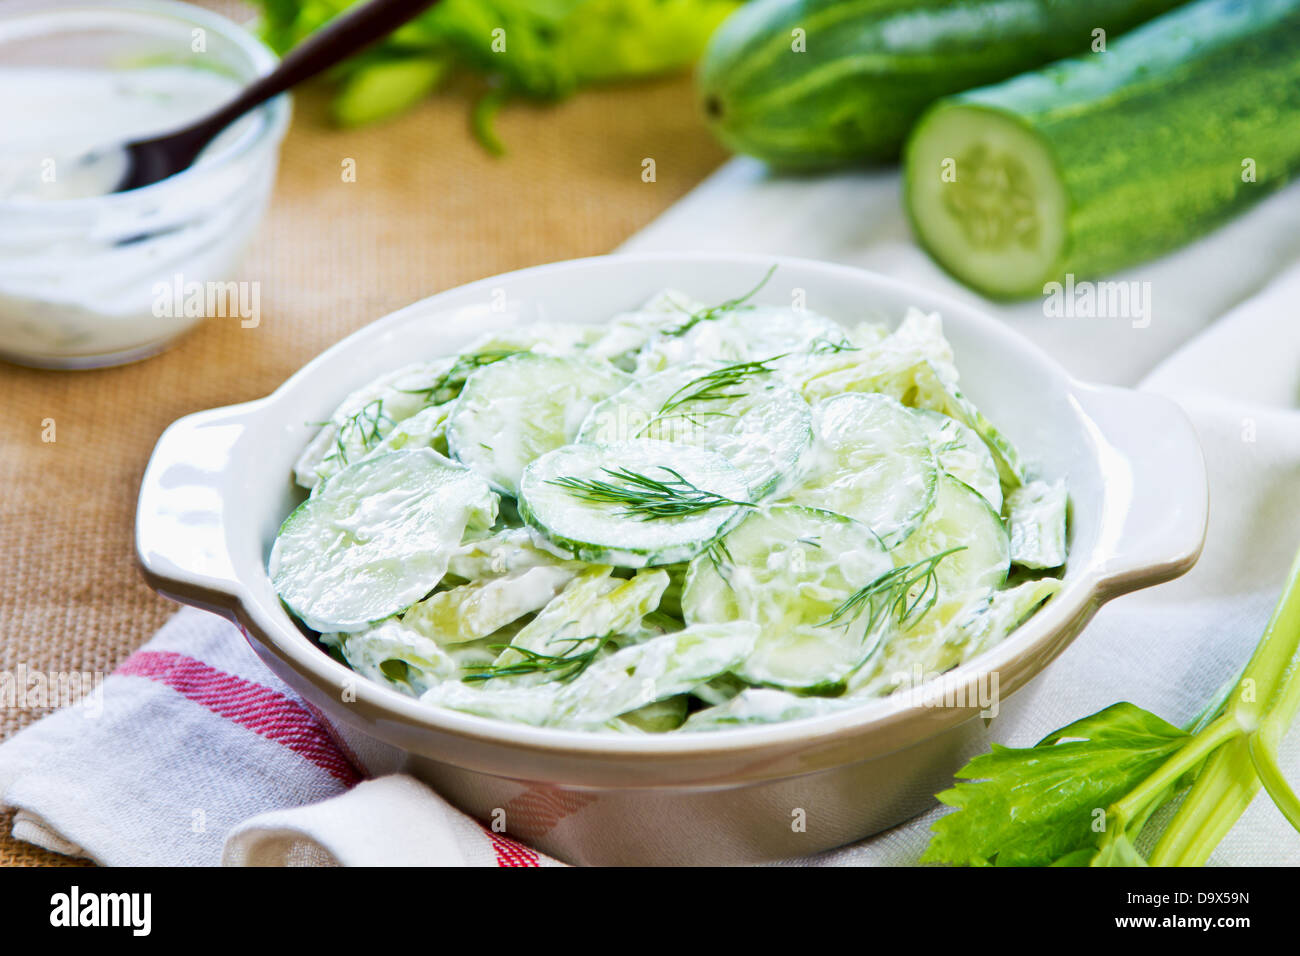 Cucumber with Celery and Dill salad in yogurt dressing Stock Photo